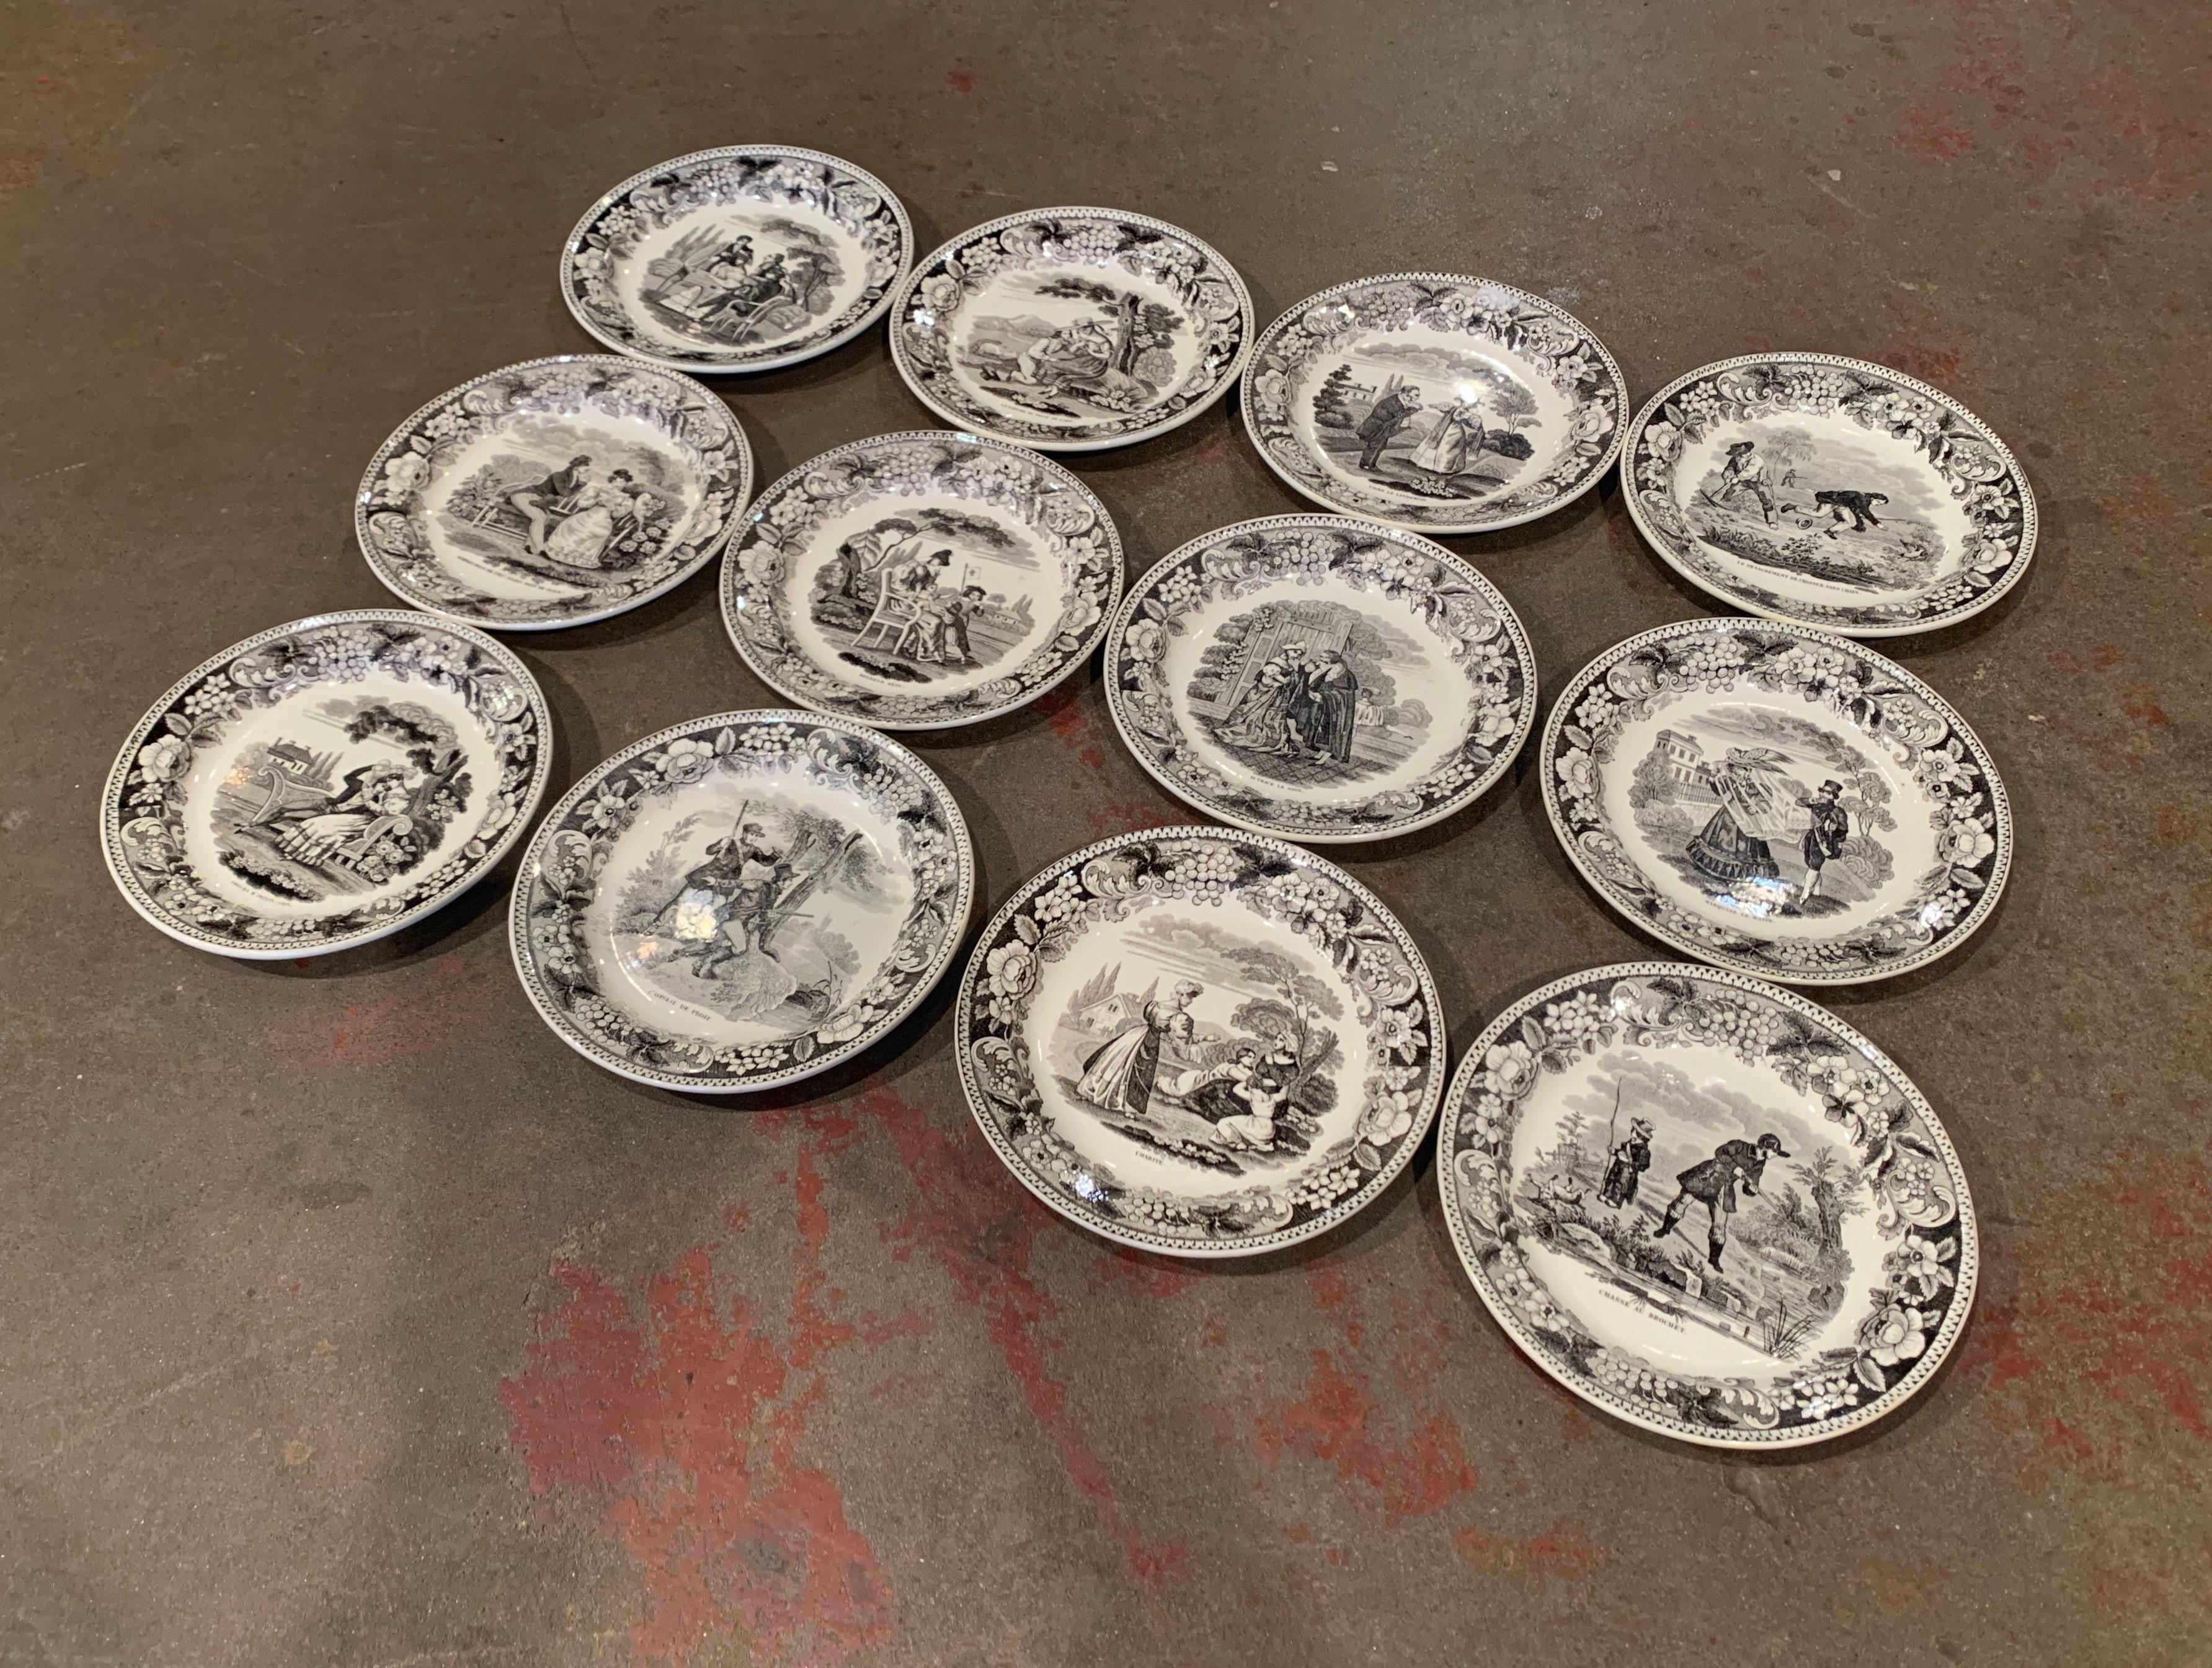 Use this elegant set of twelve antique plates to serve appetizer or desert to your guests! Crafted by Leboeuf et Thibault in Montereau, France, circa 1880, each hand painted ceramic plate features funny courting scenes or anecdotal daily events with